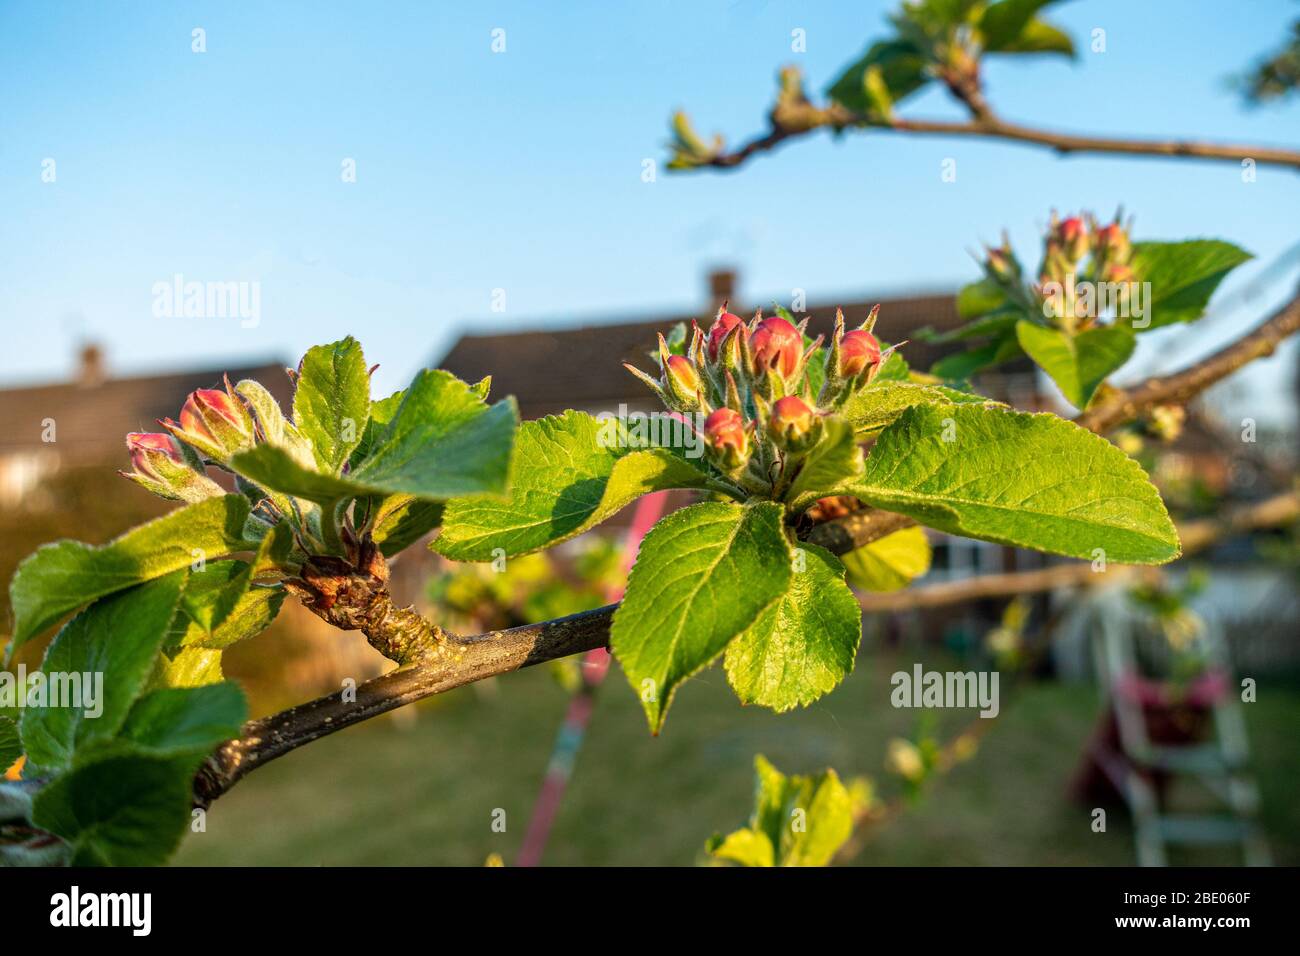 Close up of flower buds on an apple tree in a back garden. Stock Photo